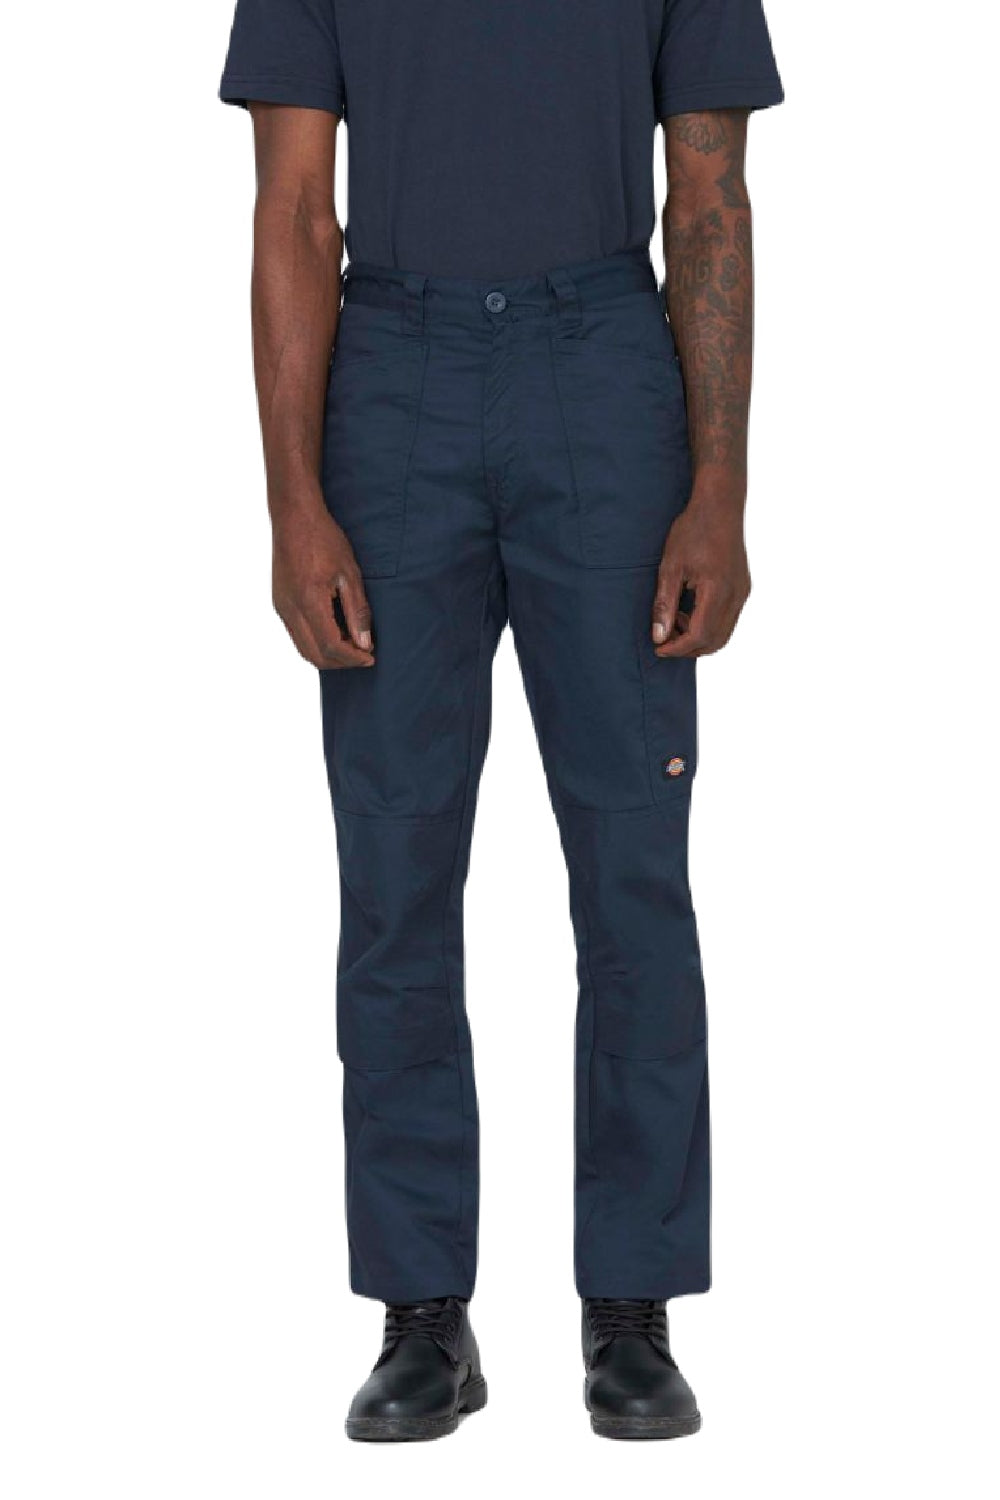 Dickies Action Flex Trousers in Navy Blue